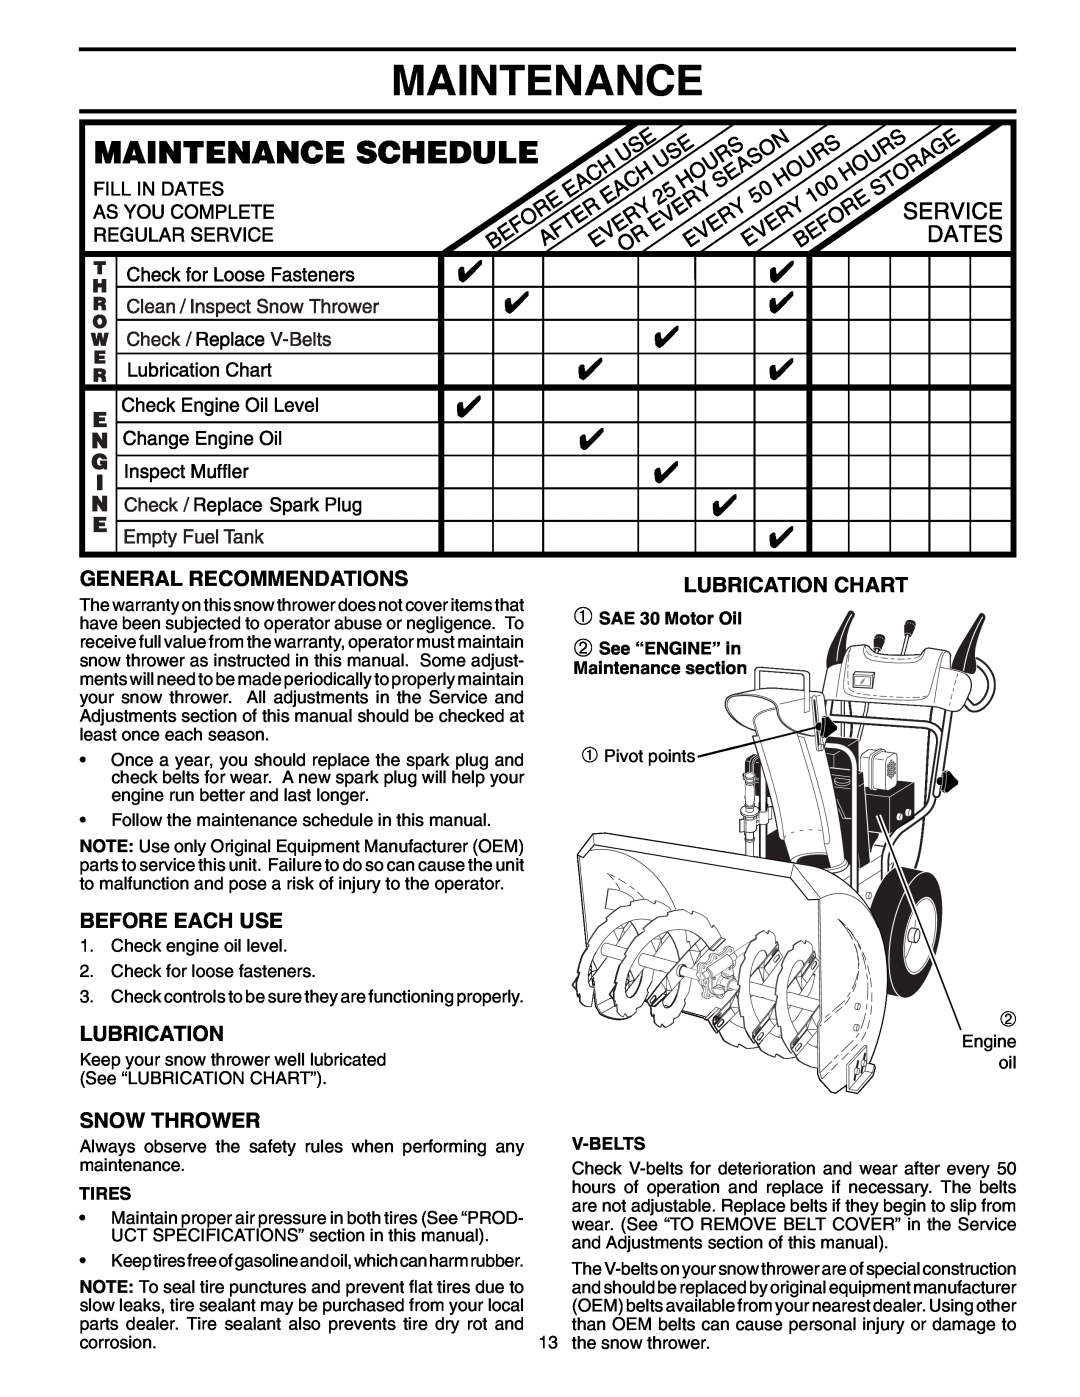 Poulan PP7527ES owner manual Maintenance, General Recommendations, Before Each Use, Lubrication Chart, Snow Thrower 